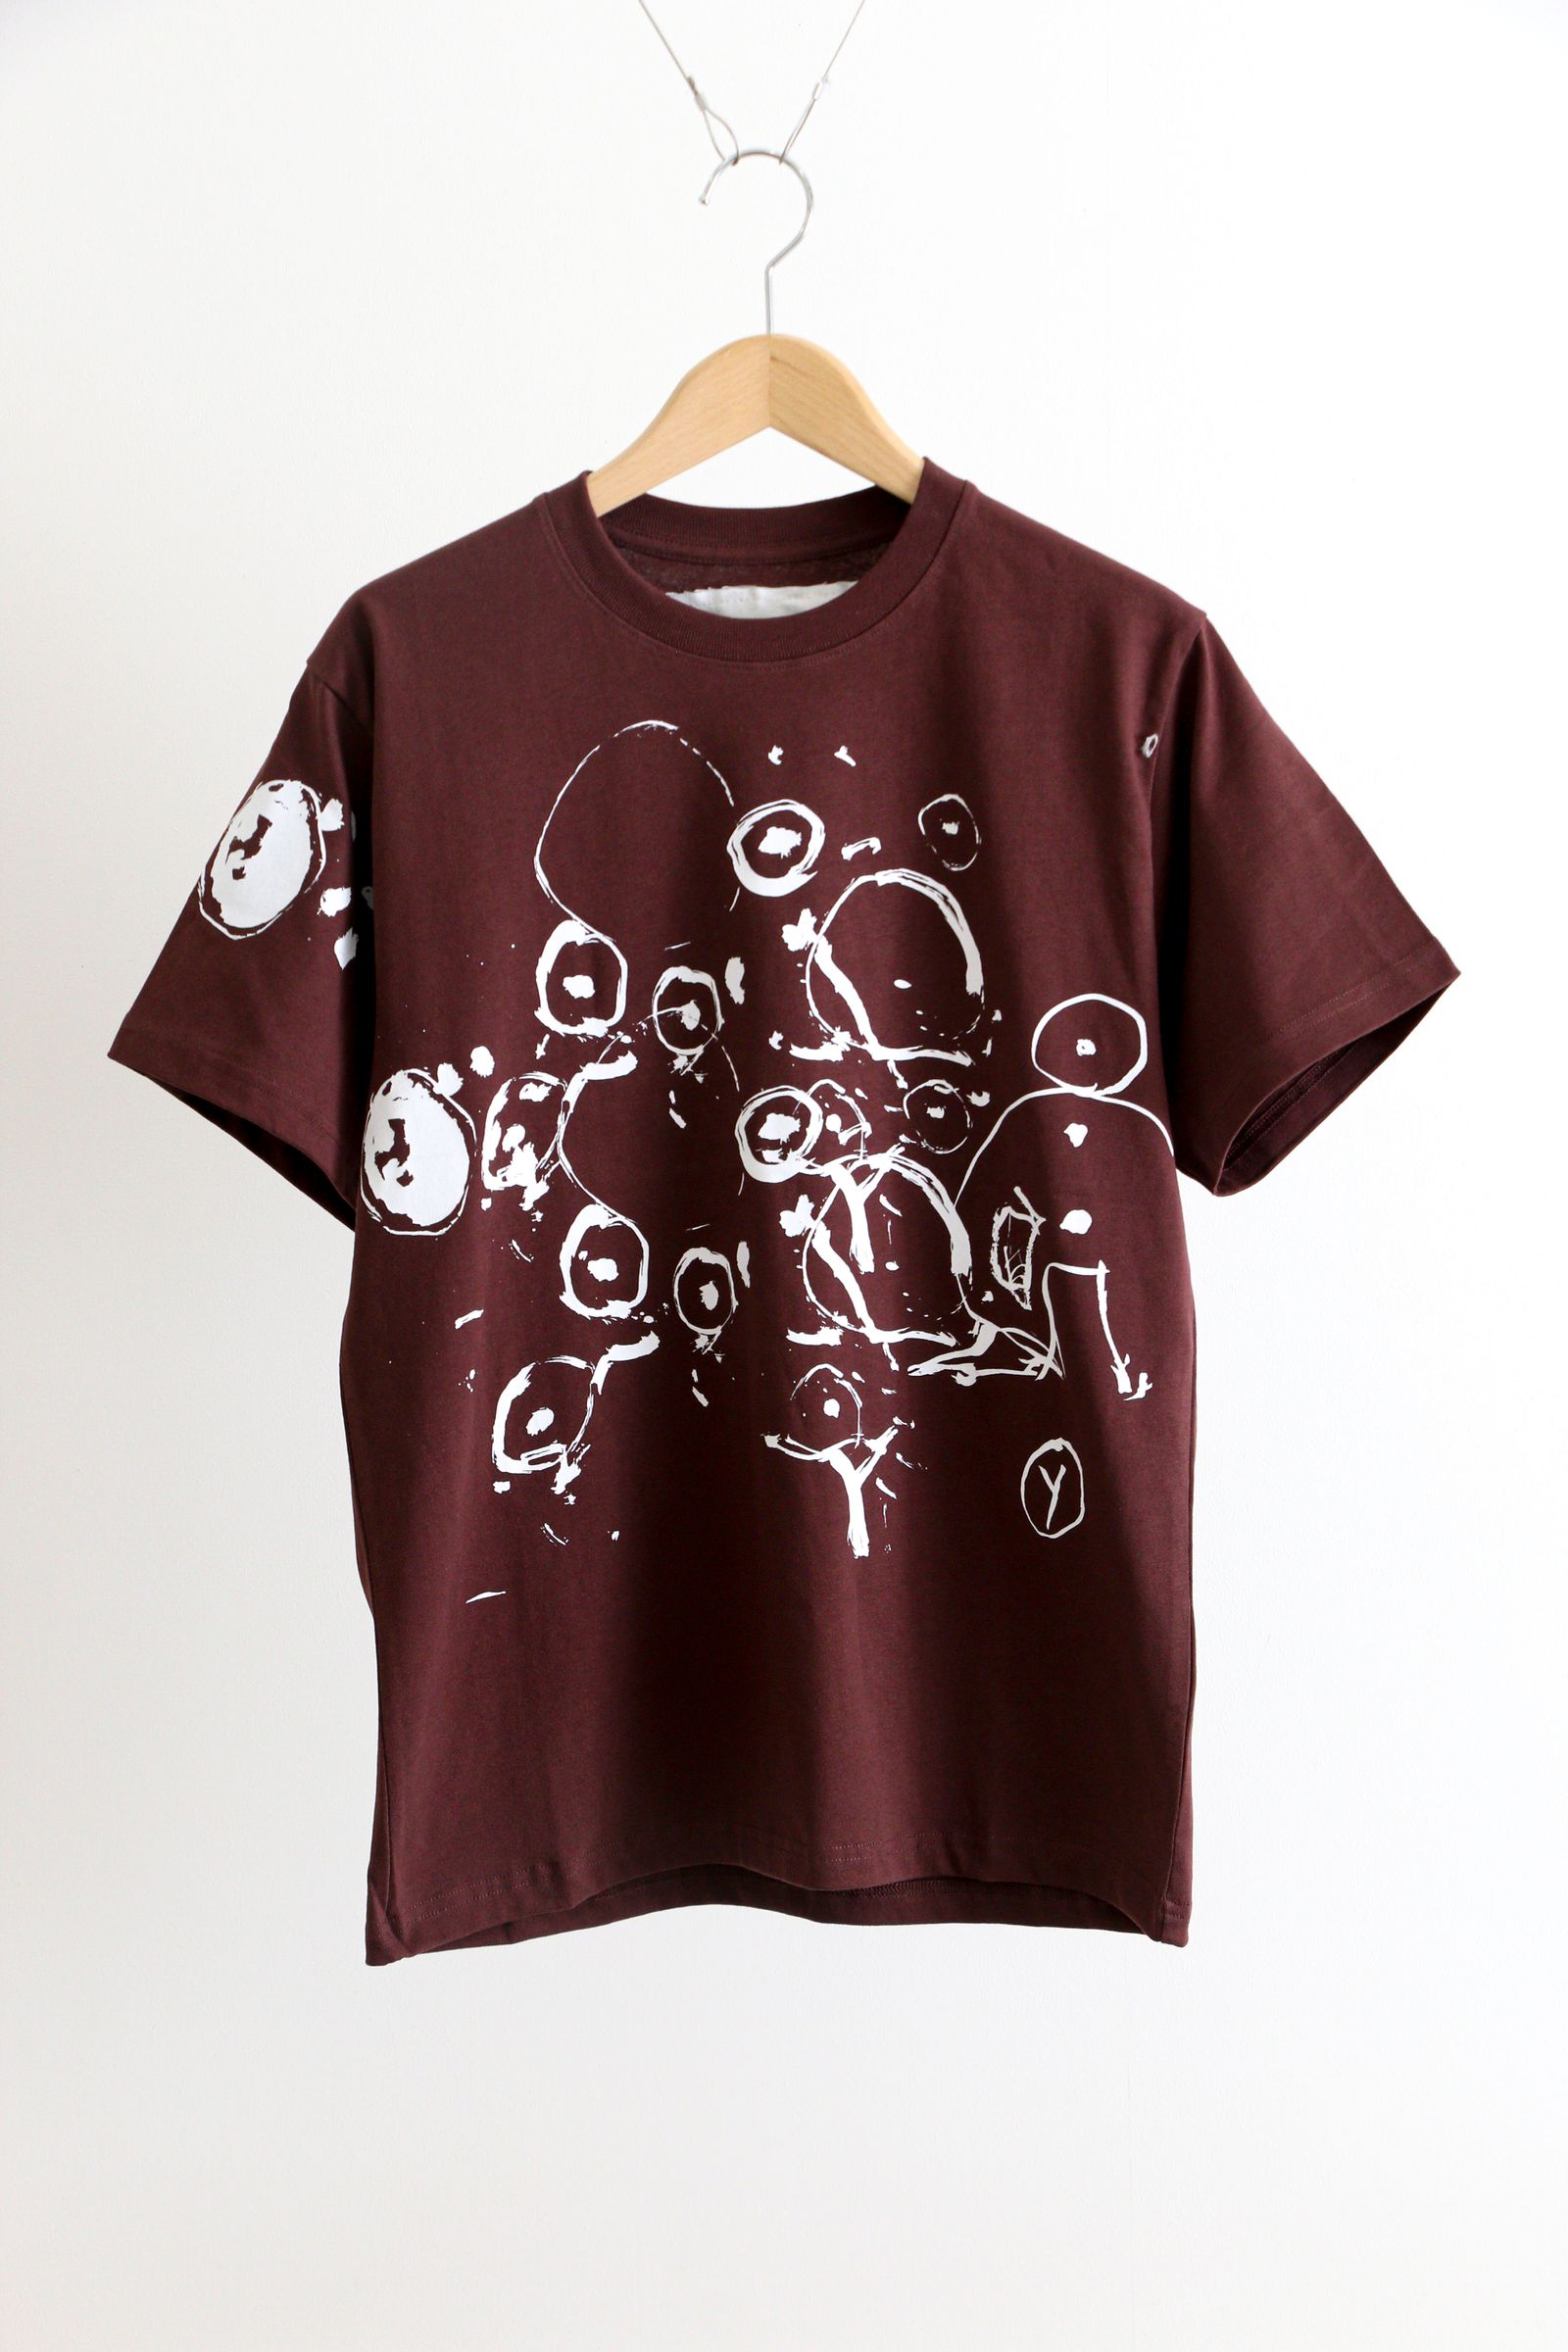 RECYCLED COTTON SS TEE / CHOCOLATE LUCAS DILLON / プリントTシャツ / ブラウン - M